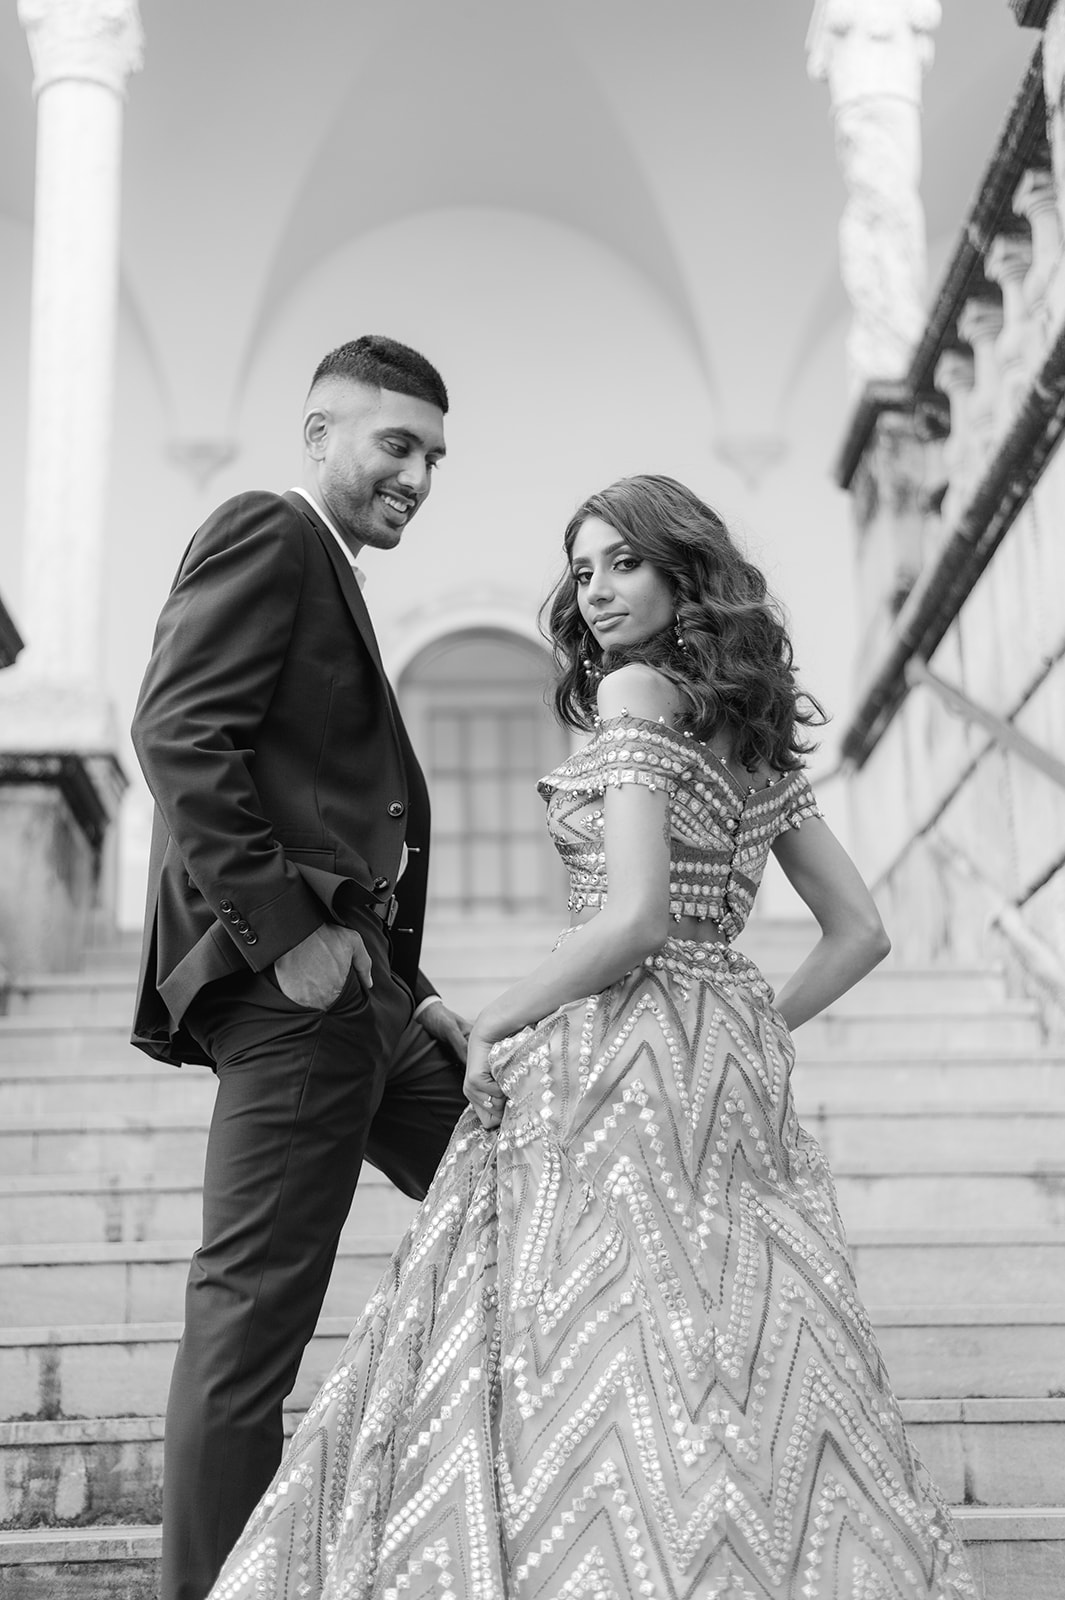 "Indian bride and groom embrace in front of the Ringling Museum's Ca' d'Zan"
